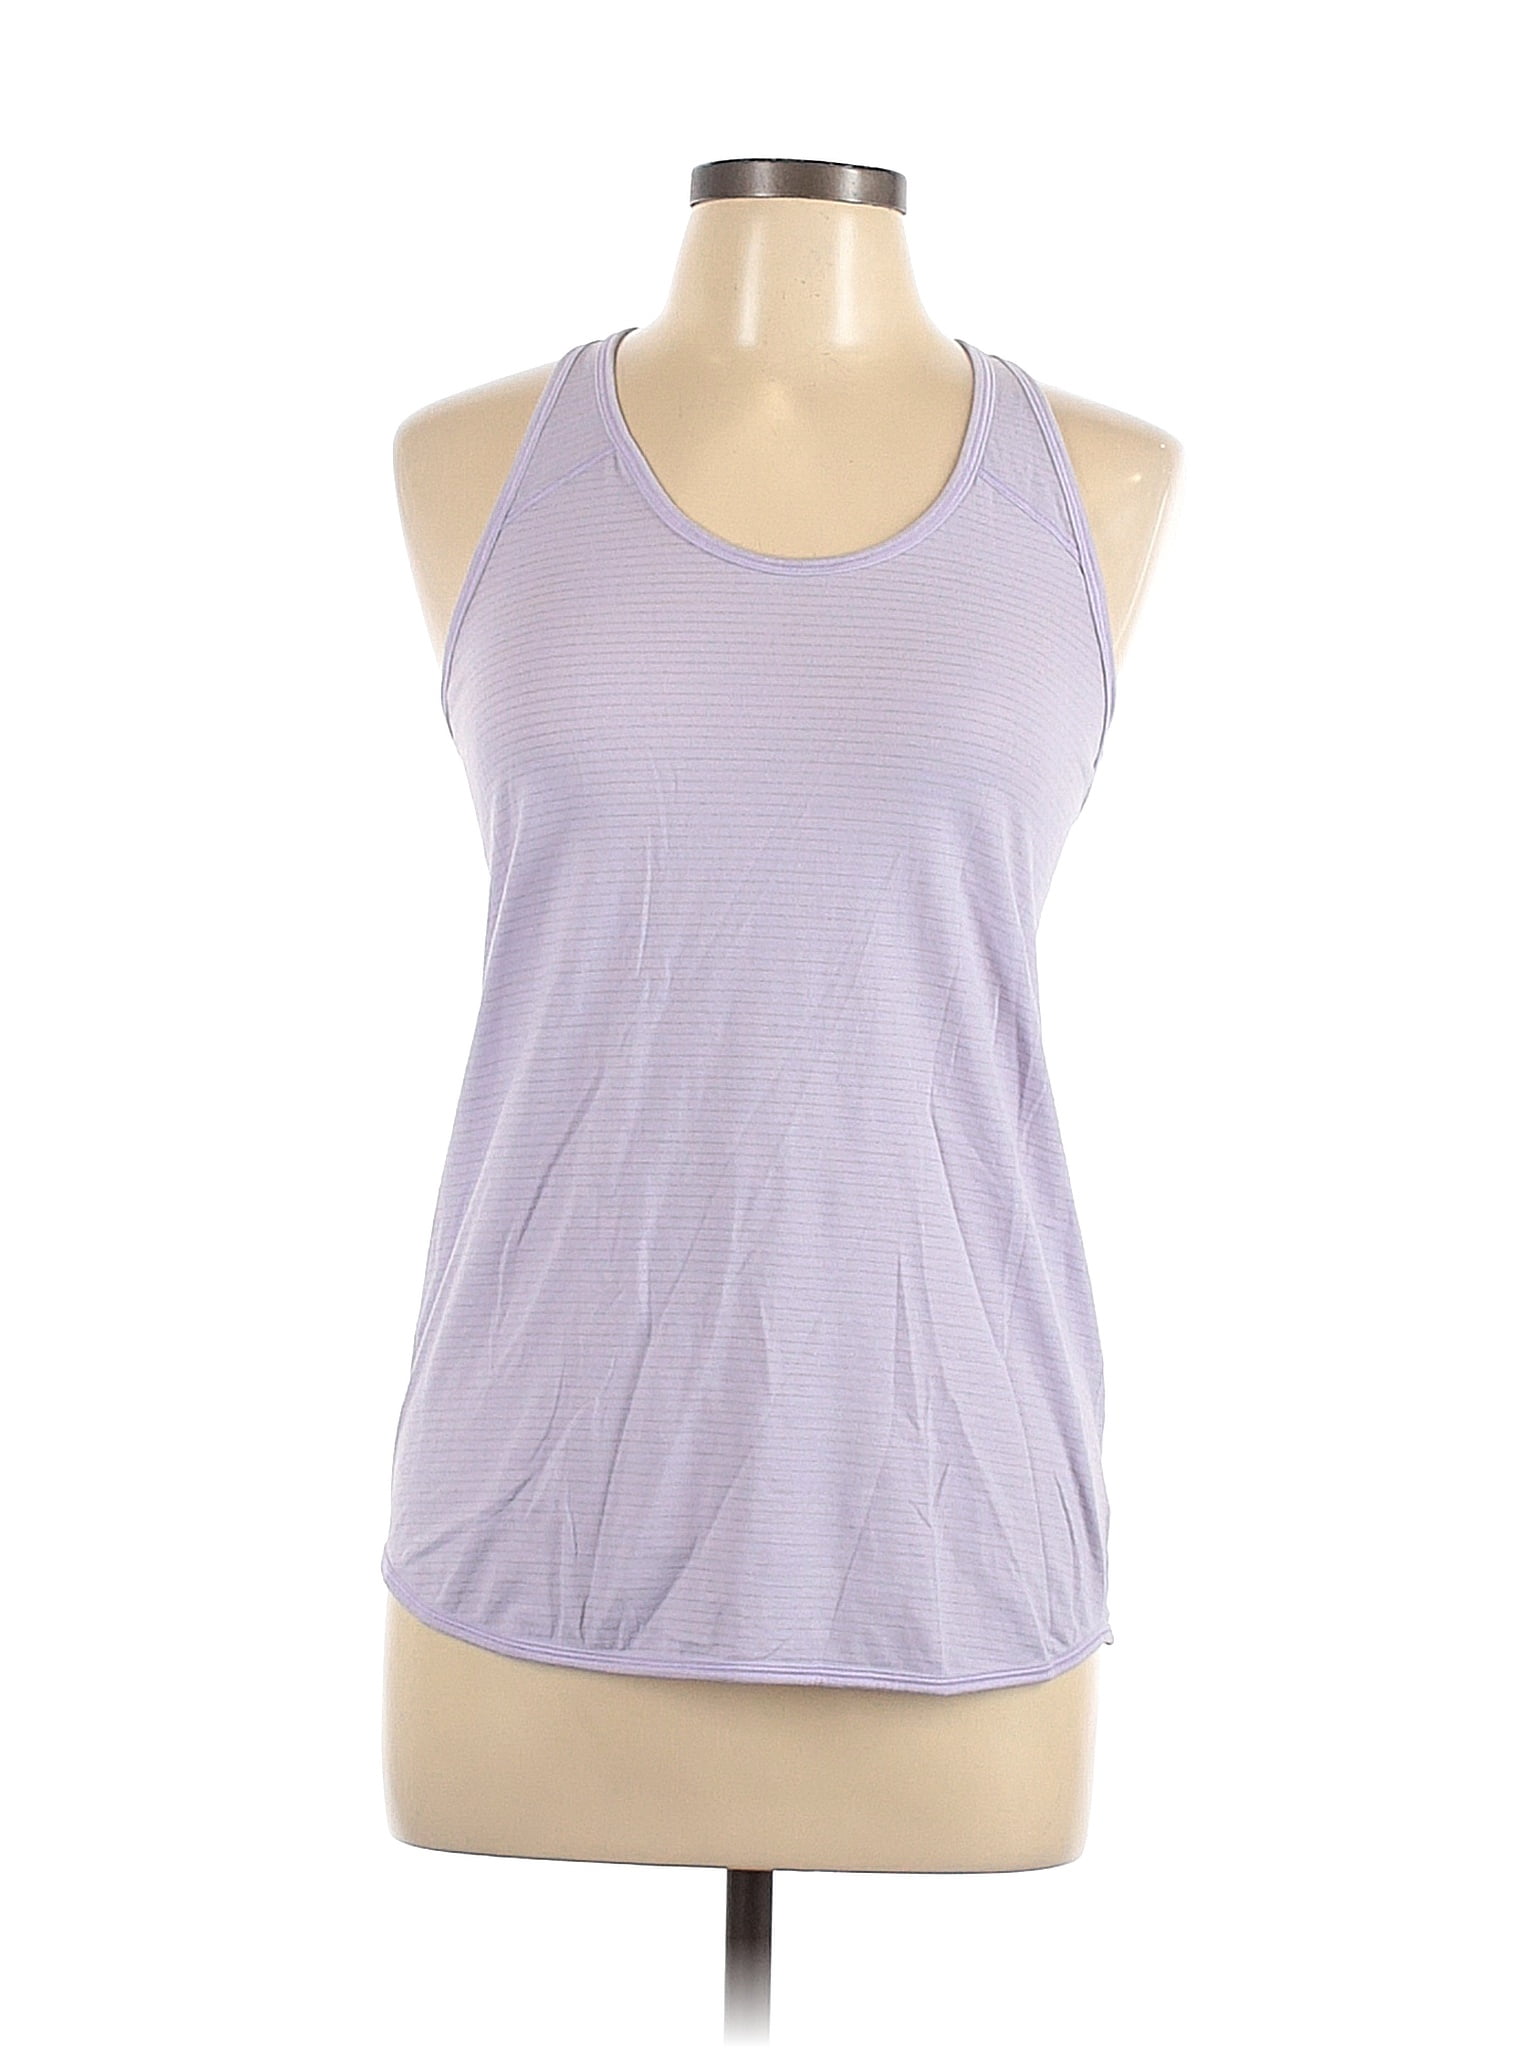 Pre-Owned Lululemon Athletica Womens Size 10 Active Nigeria